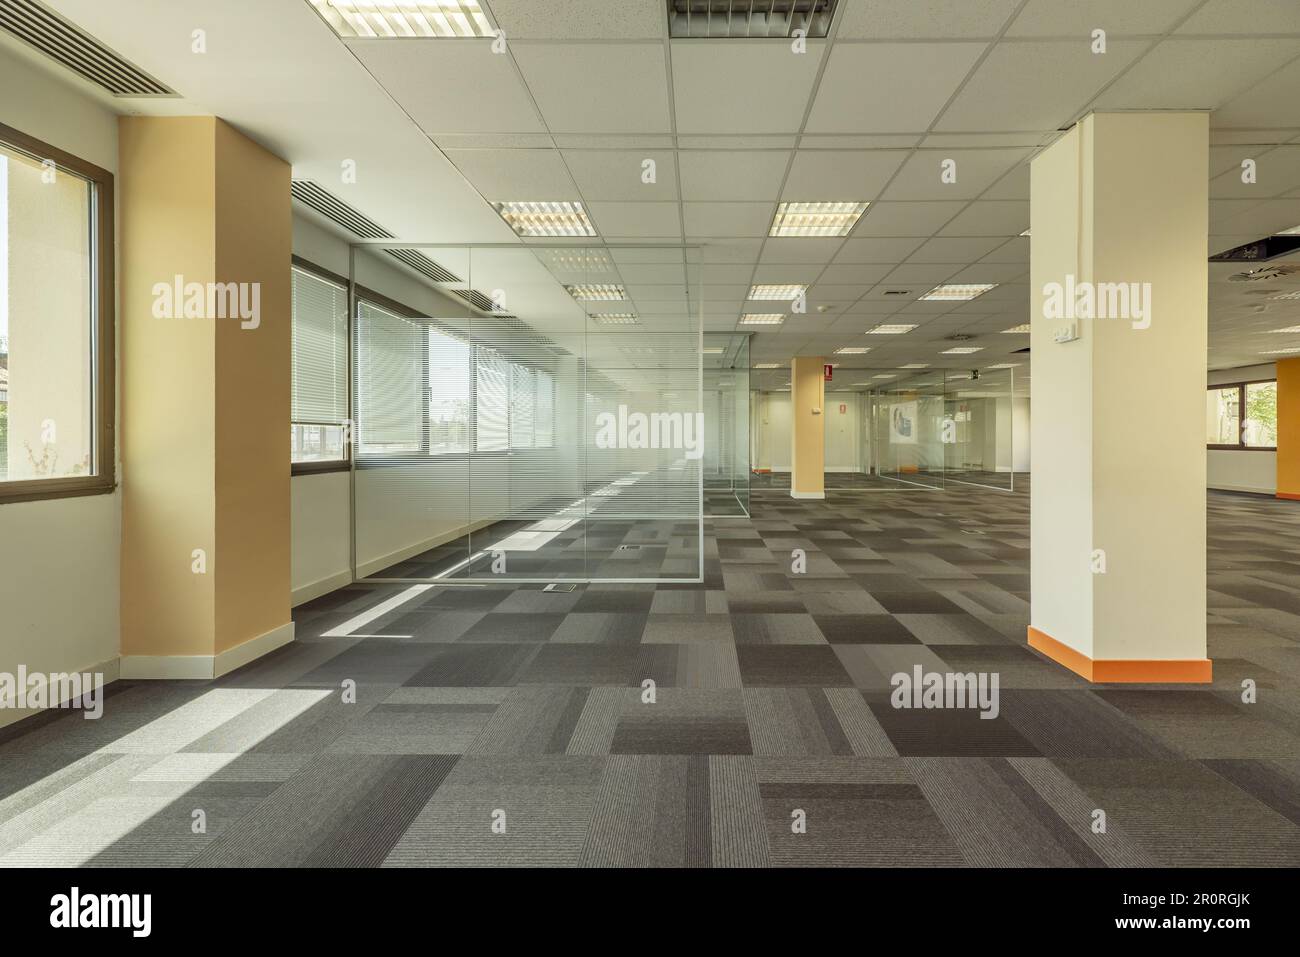 Interior of an office building with open spaces divided with tempered glass partitions Stock Photo